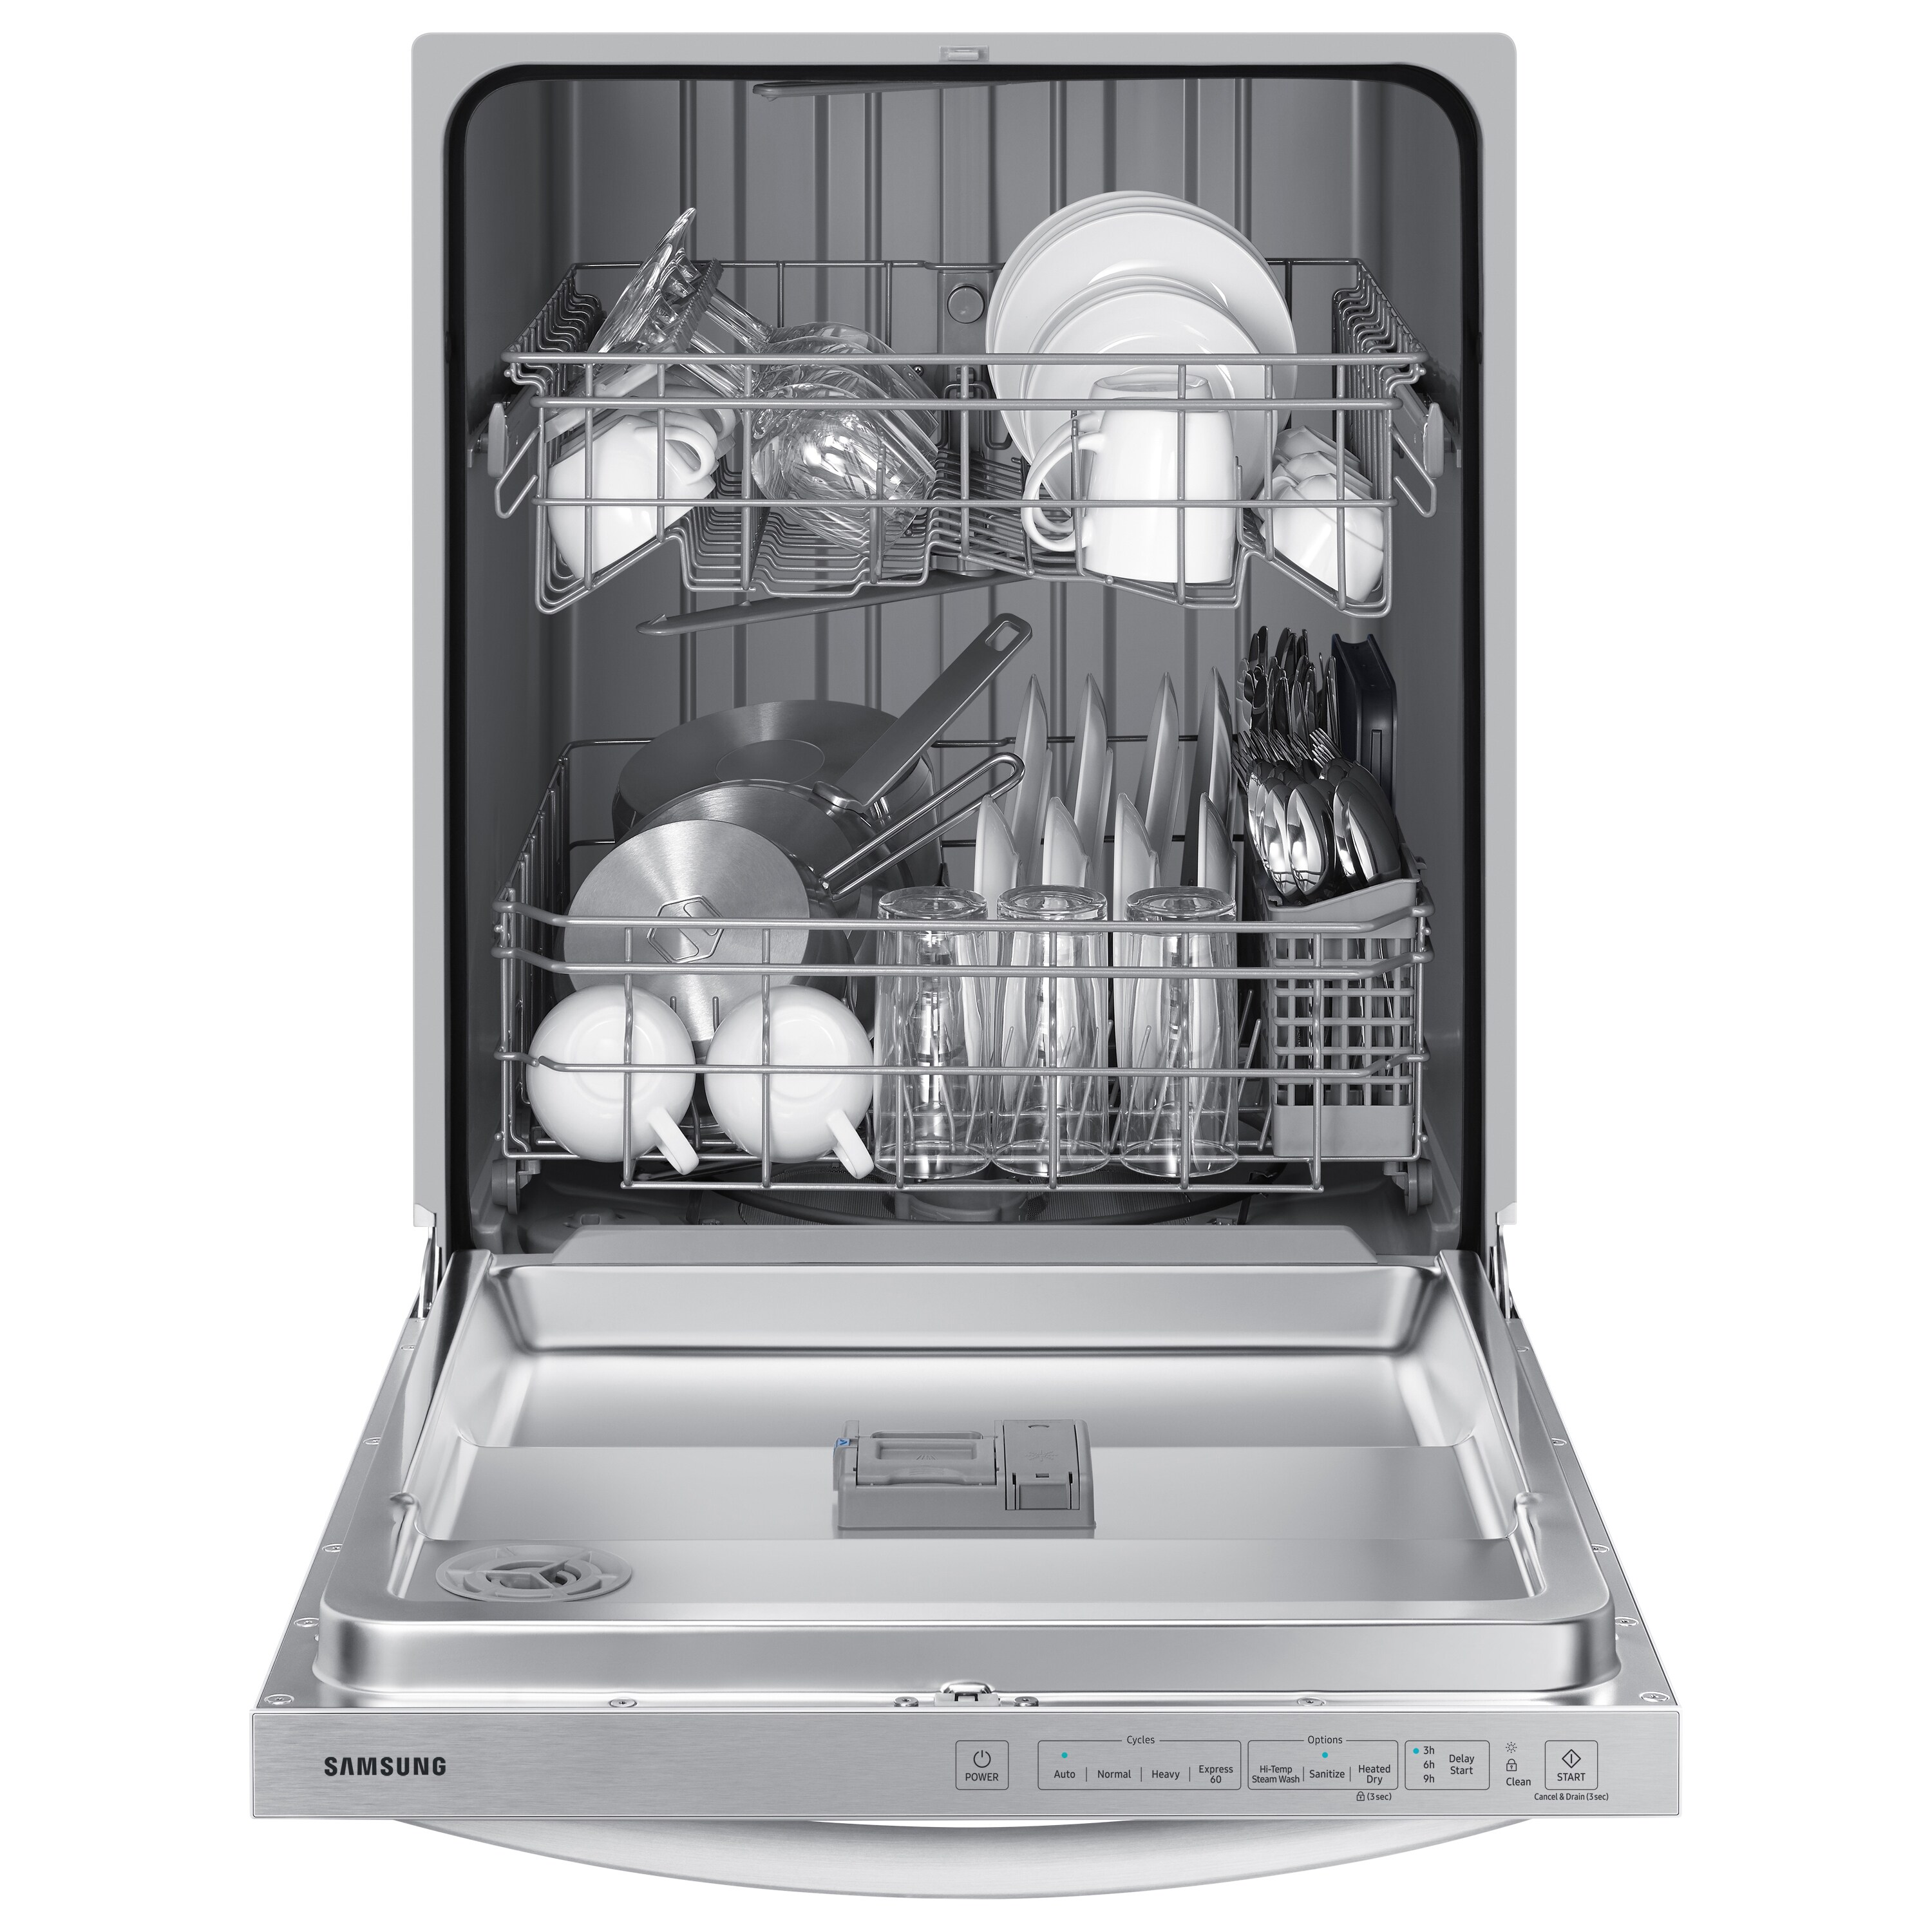 Samsung Top Control 24-in Built-In Dishwasher (White) ENERGY STAR, 55 ...